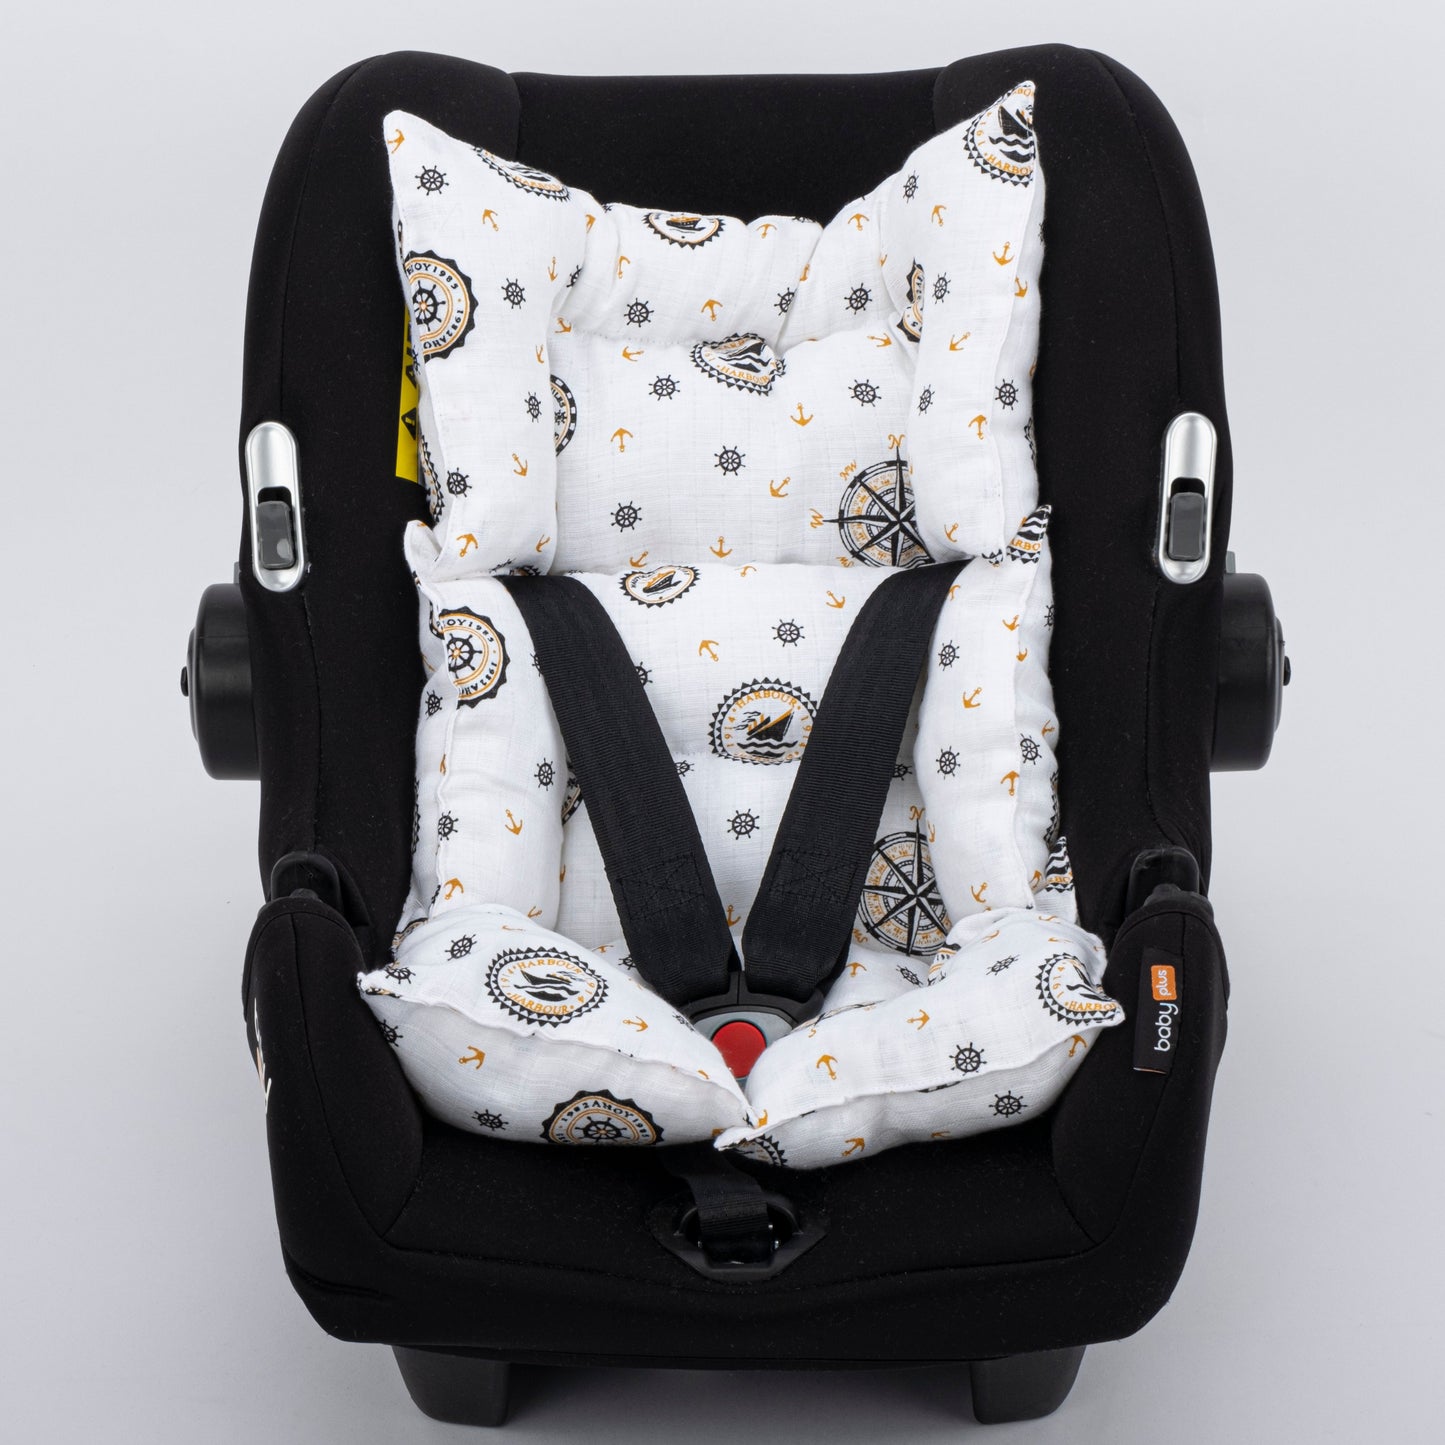 Stroller Cover Set - Double Side - Yellow Muslin - Yellow Ship